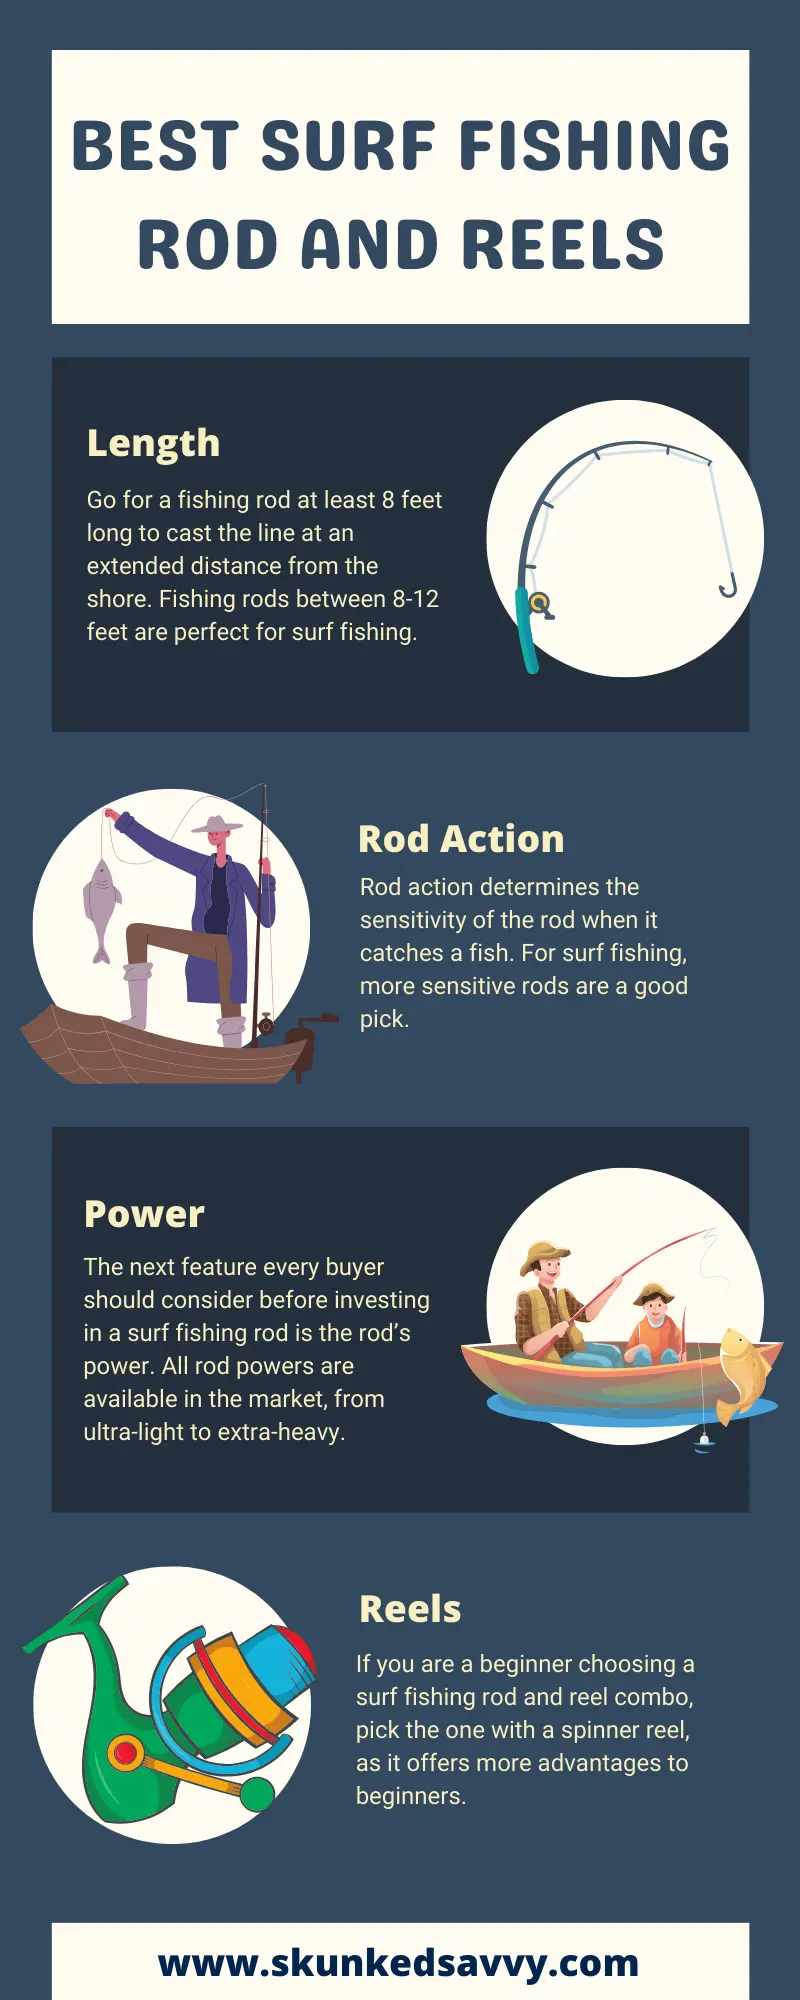 What to Look for While Choosing Surf Fishing Rod and Reel